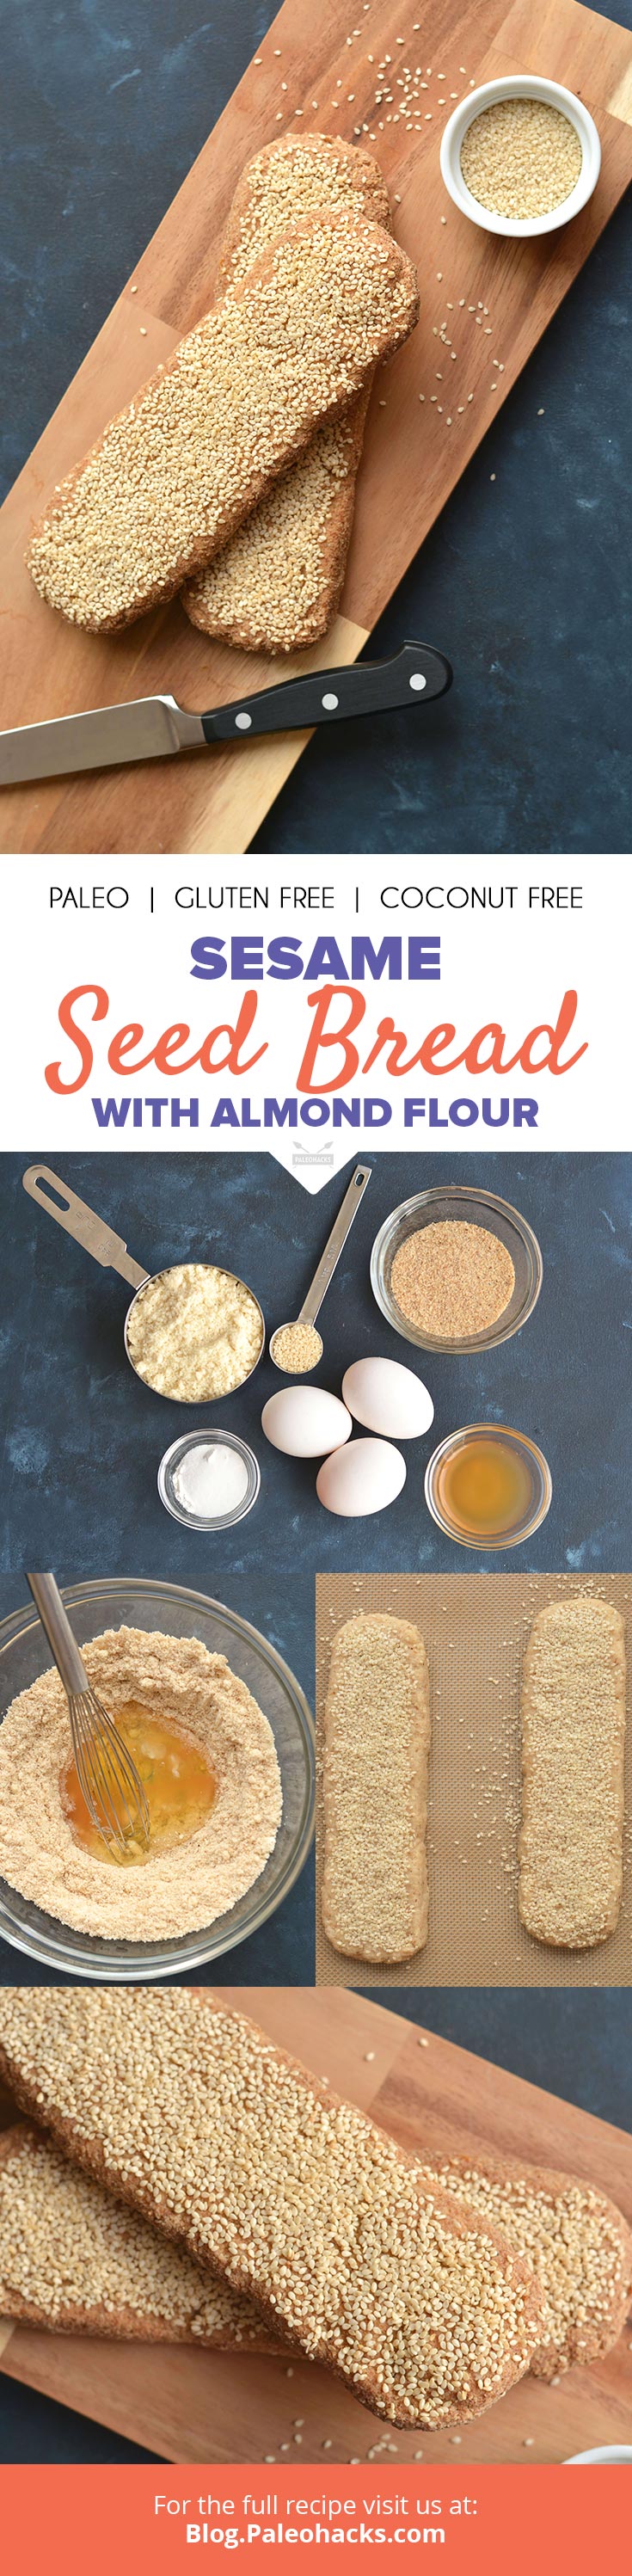 This grain-free and gluten-free Paleo Sesame Seed Bread is perfect for creating sandwiches, slathering on jam or topping with avocado!